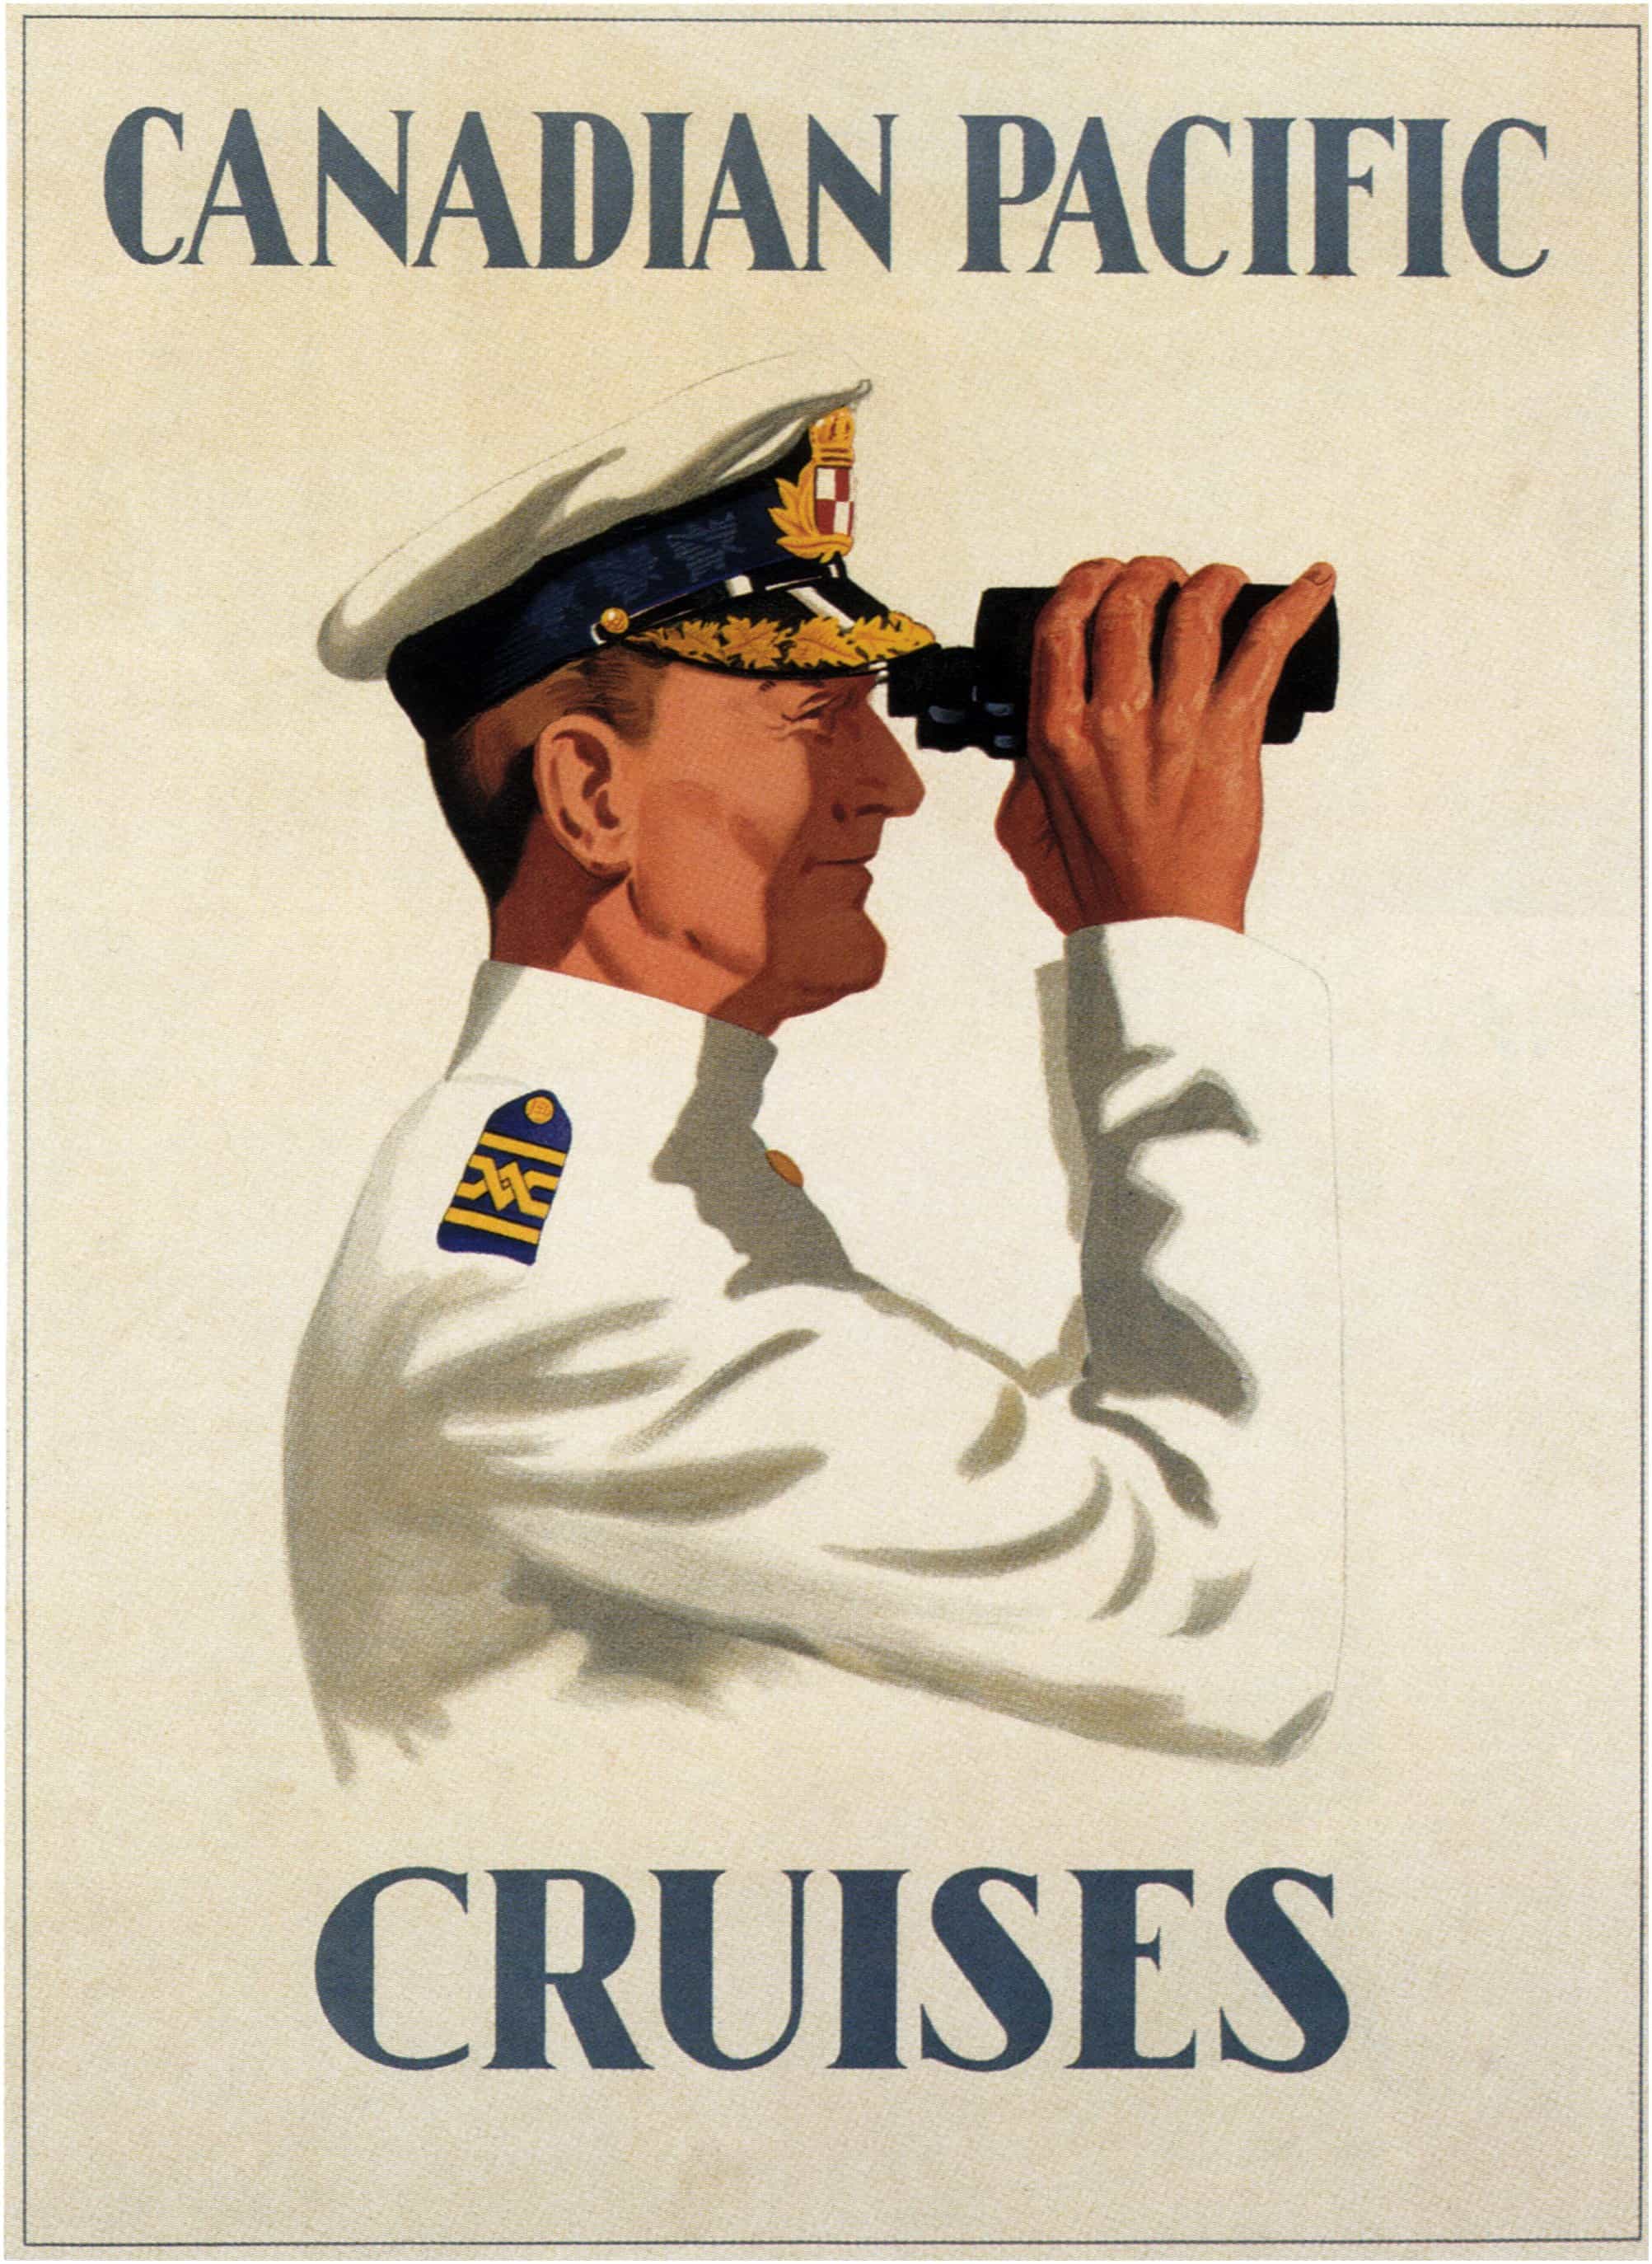 24x36 1930s Great Lakes Candian Pacific Cruise Vintage Travel Poster 